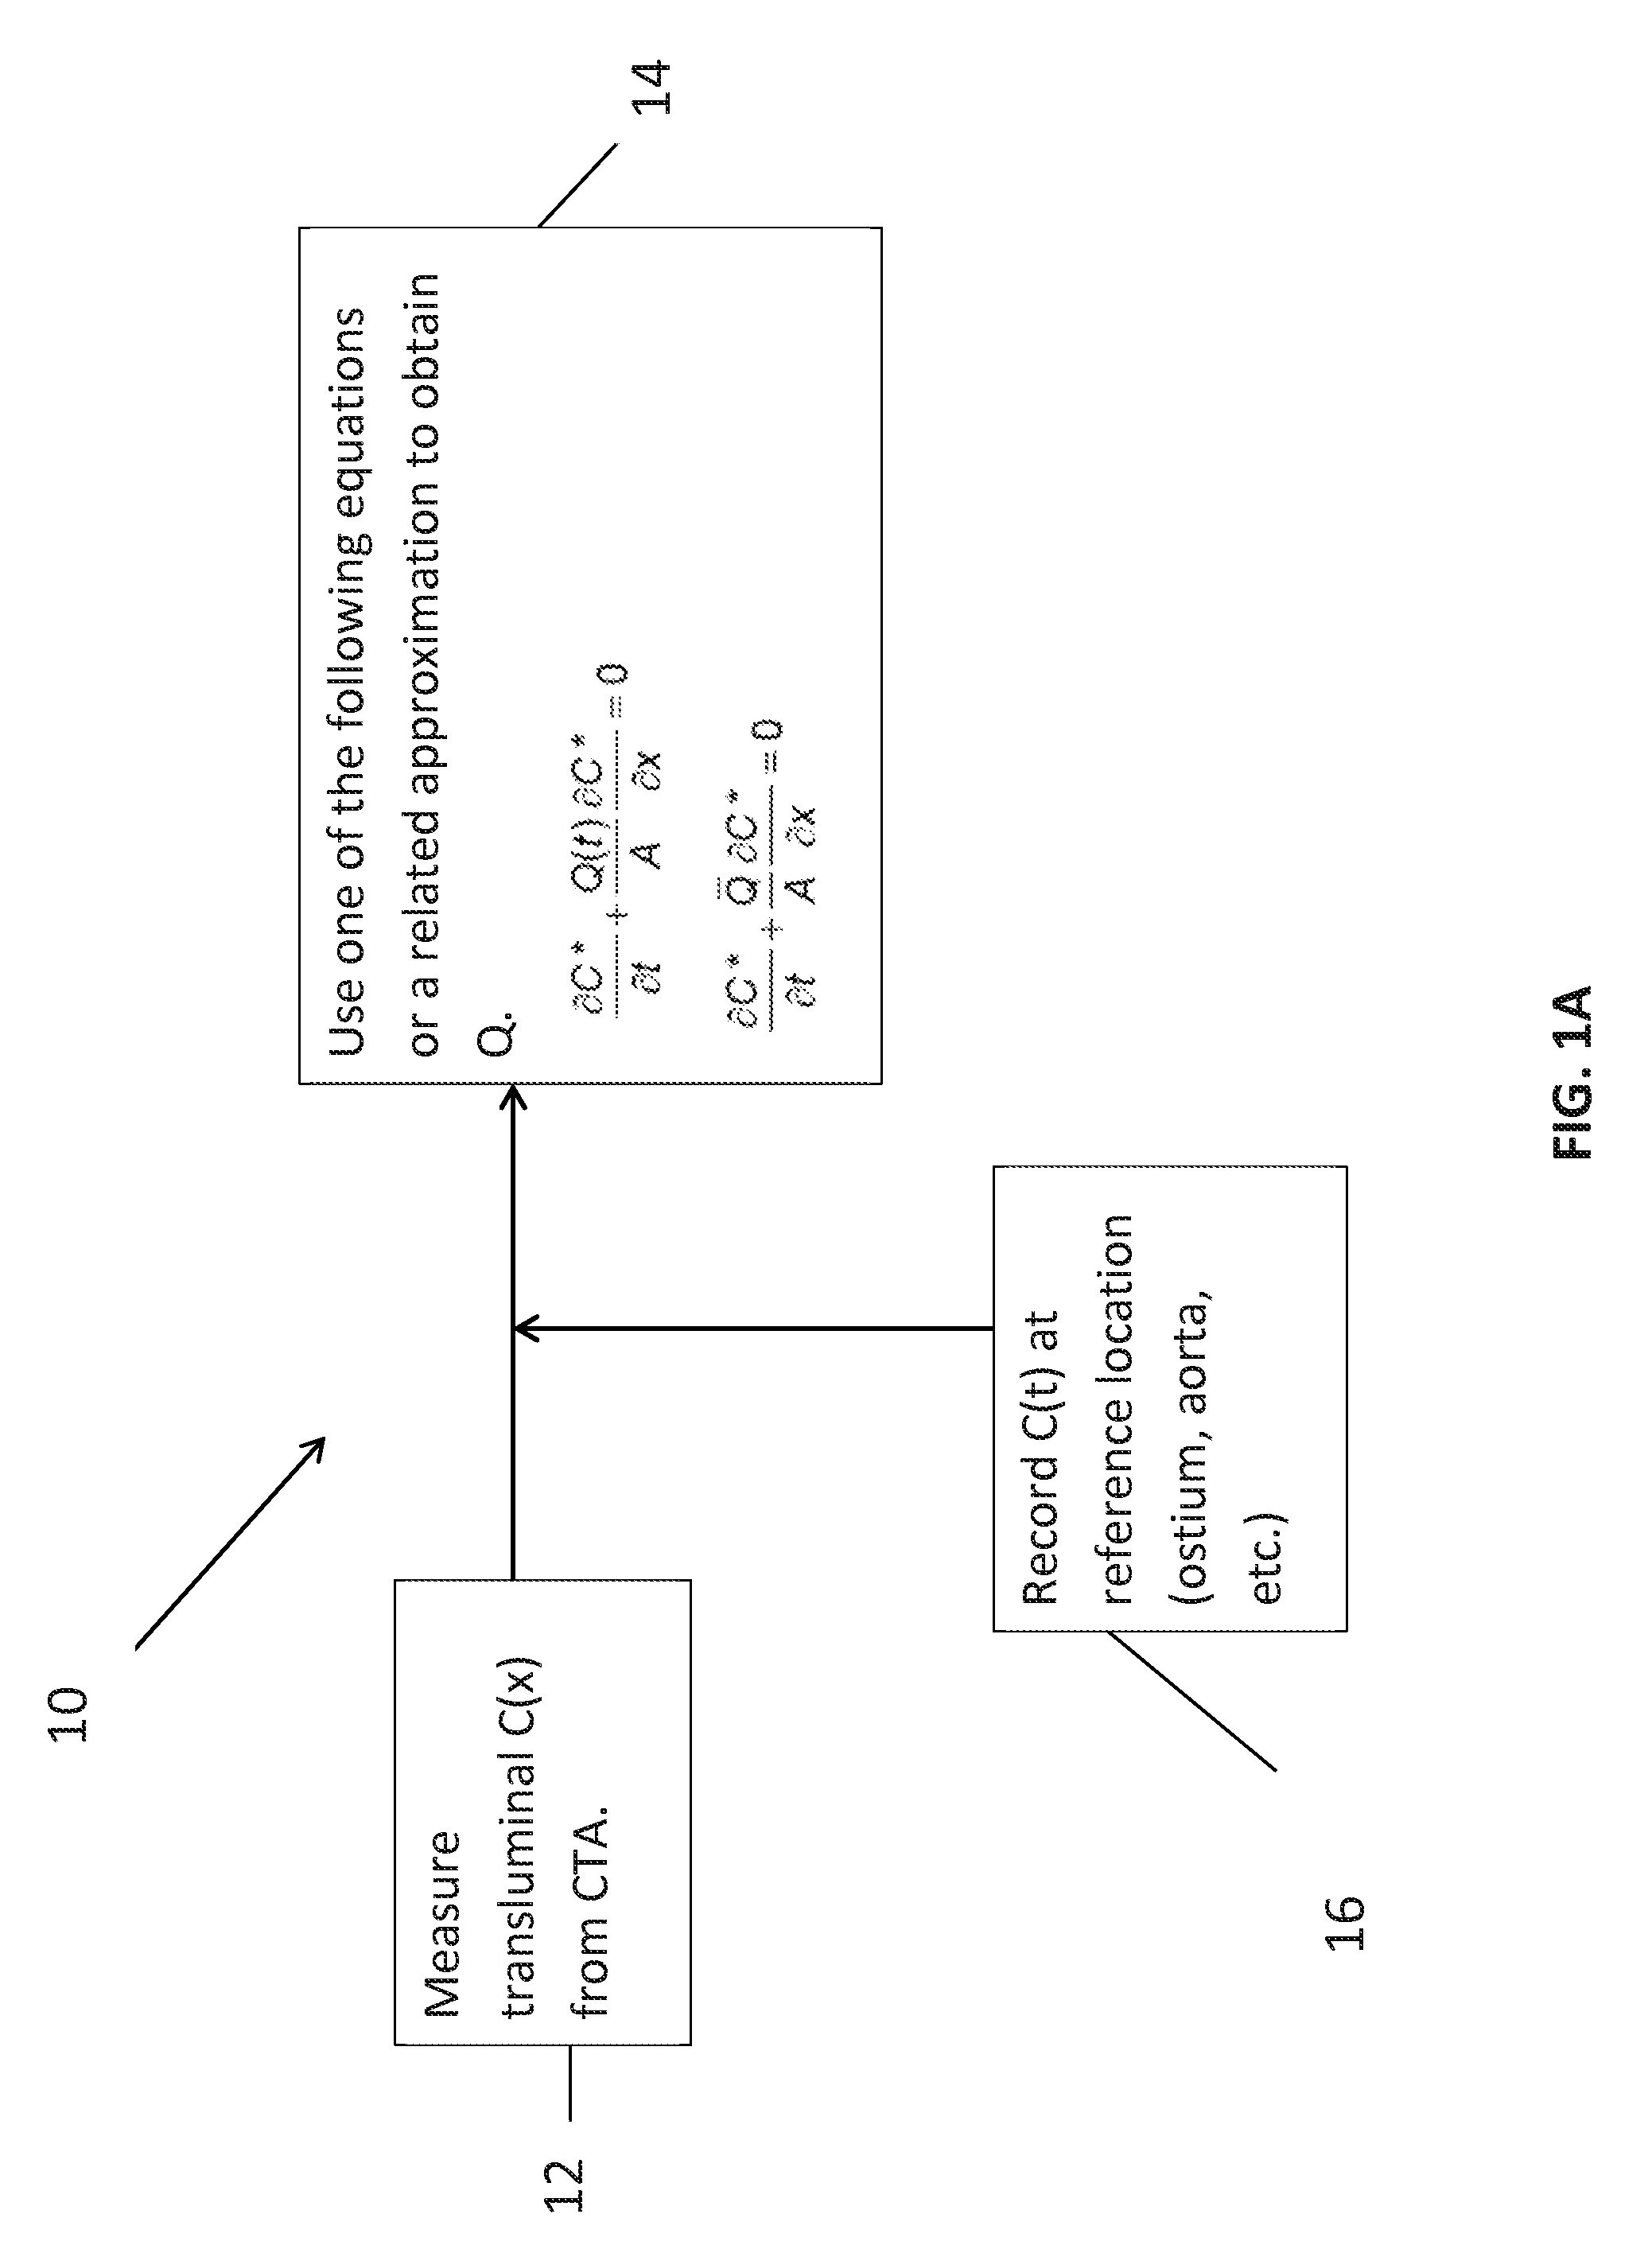 Method for Estimating Flow Rates, Pressure Gradients, Coronary Flow Reserve, and Fractional Flow Reserve from Patient Specific Computed Tomography Angiogram-Based Contrast Distribution Data